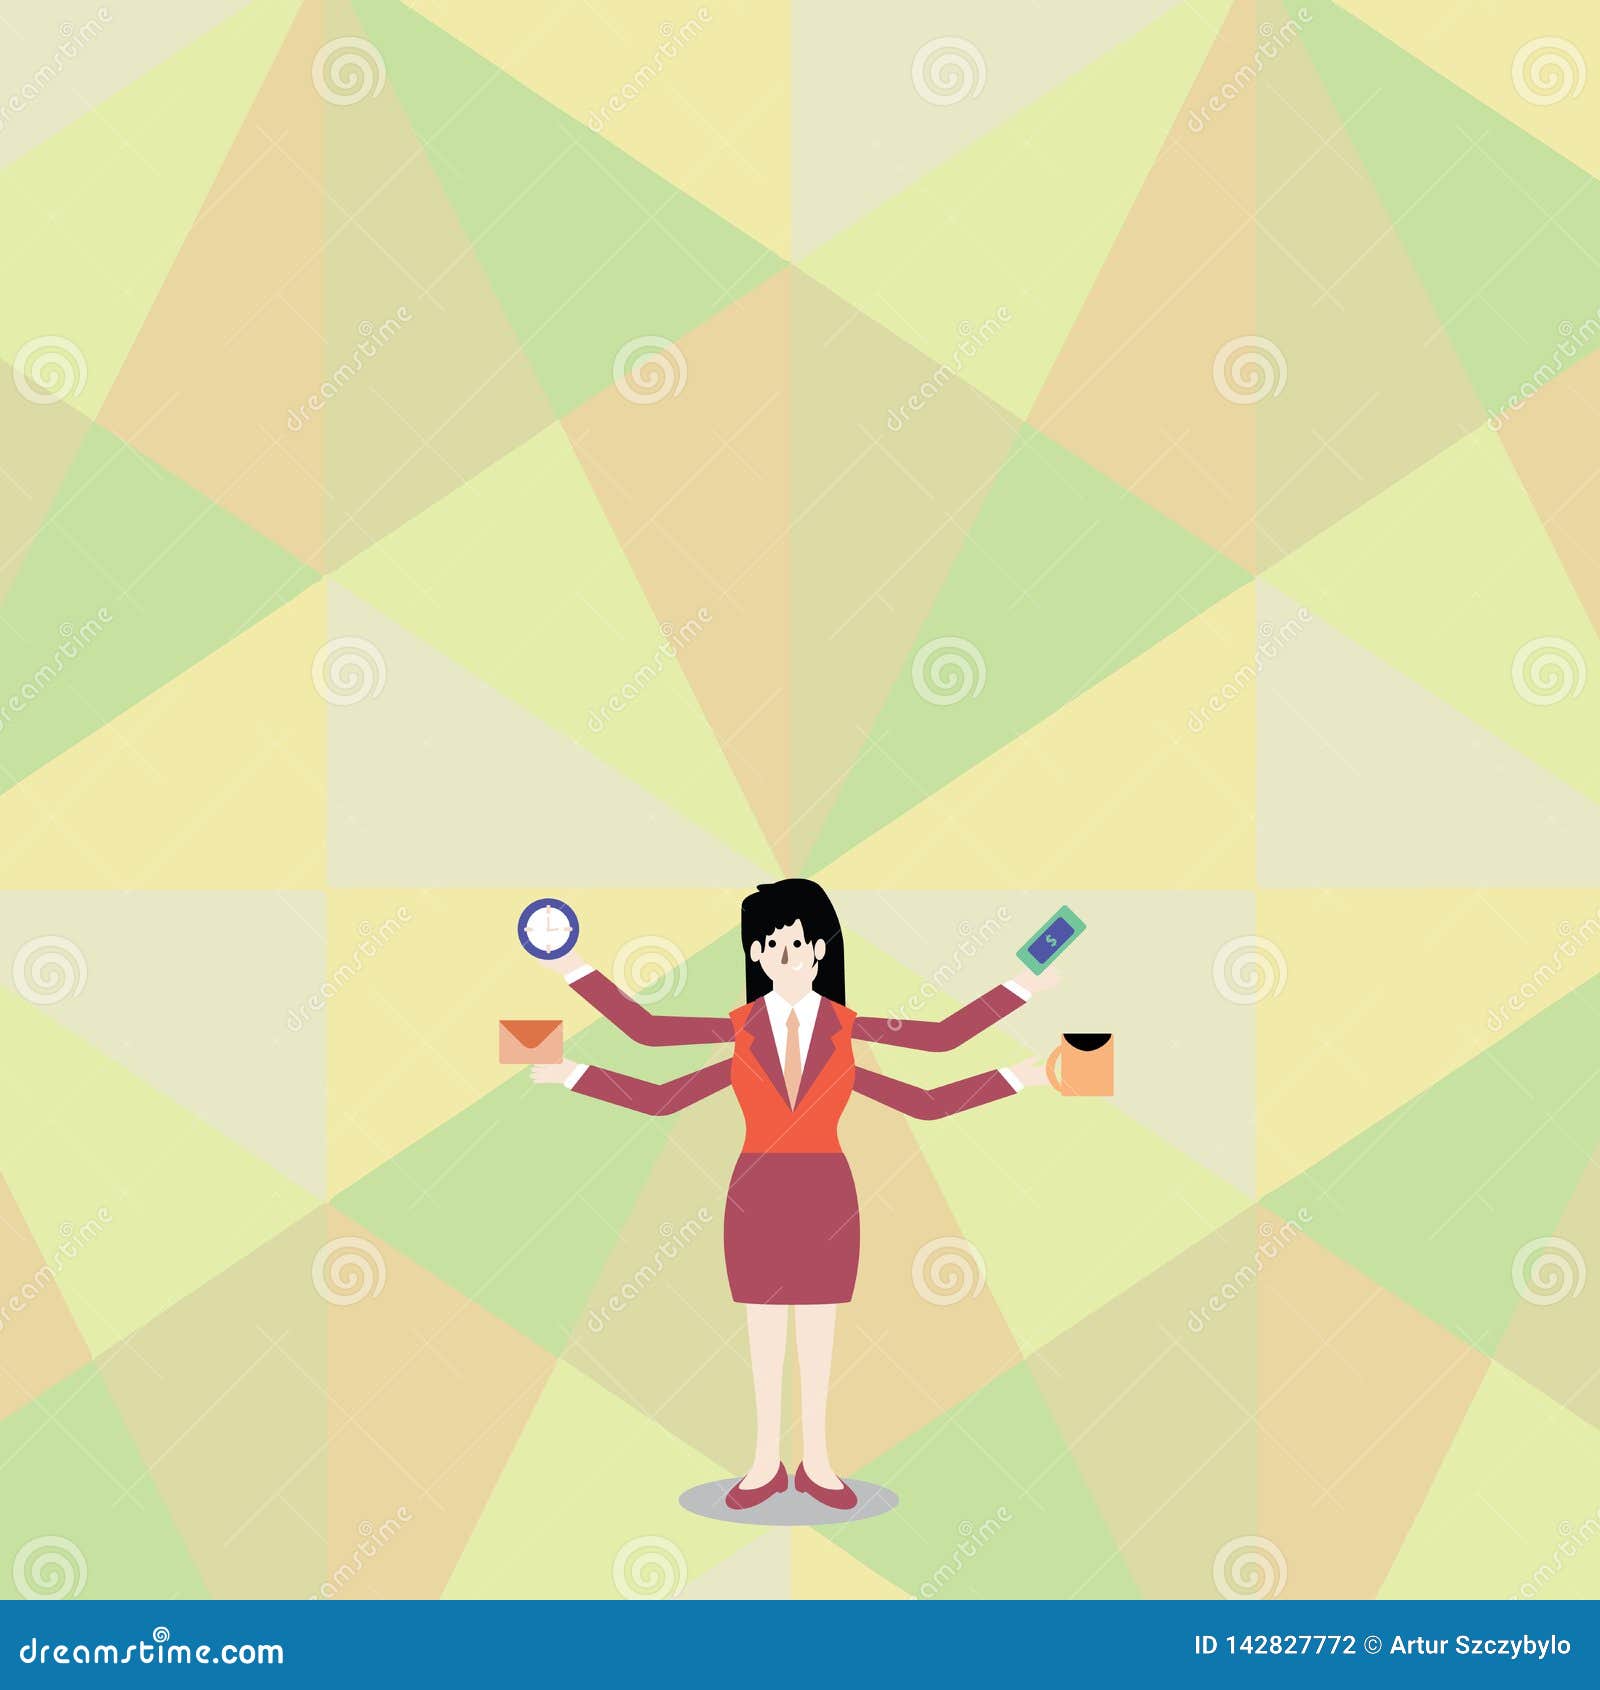 Woman in Business Suit Standing with Four Arms Exending Sideways.  Businesswoman with 4 Limbs Holding Workers Stuff Stock Vector -  Illustration of limb, standing: 142827772